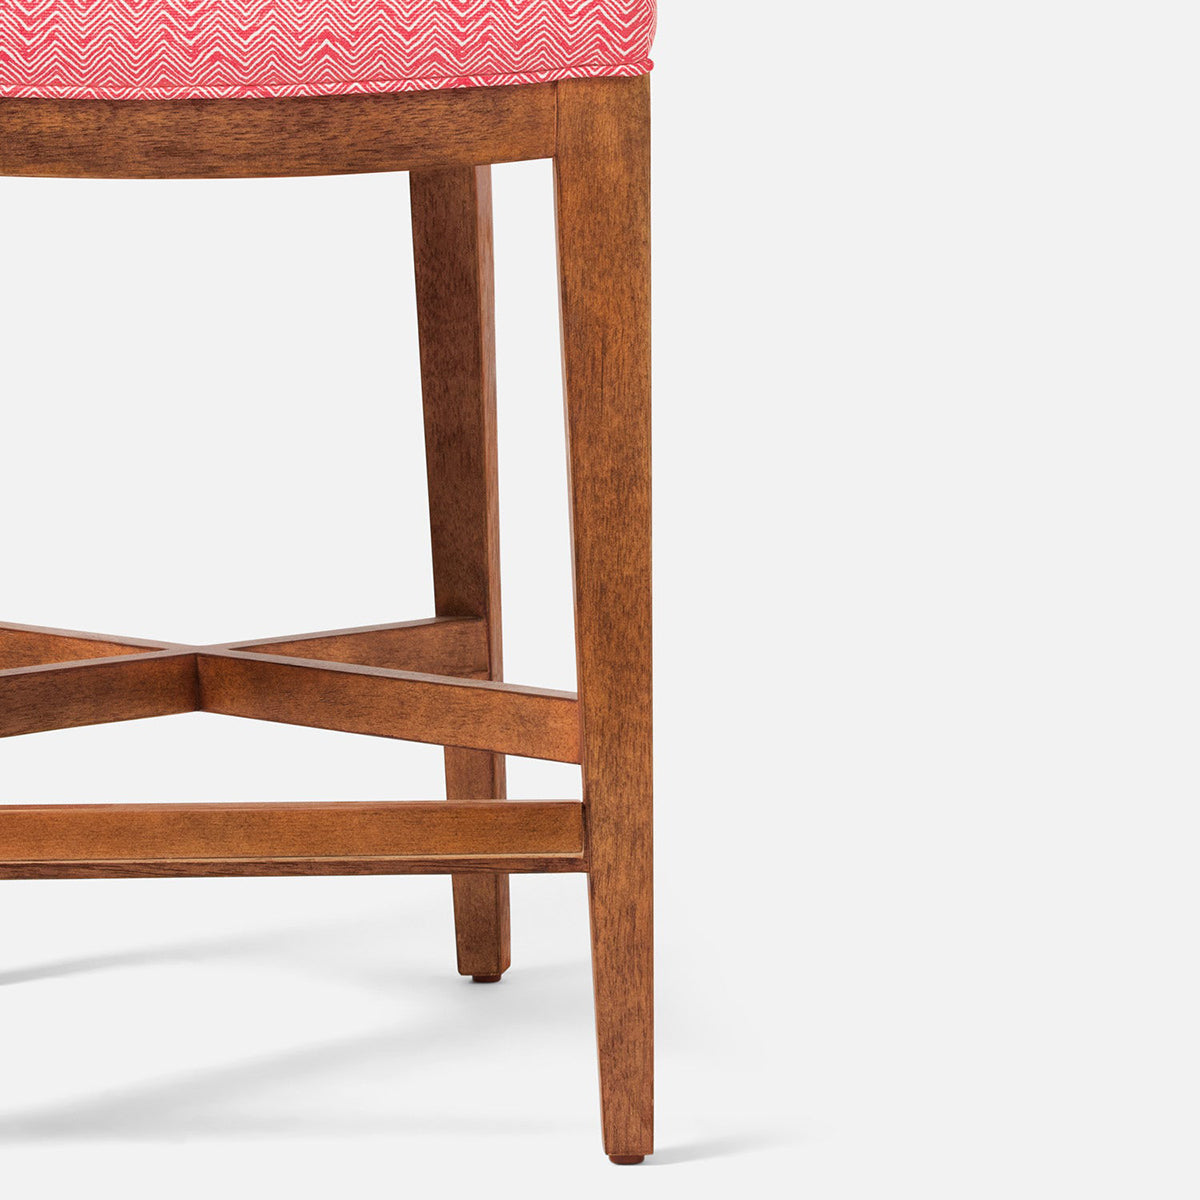 Made Goods Carleen Wingback Cane Counter Stool in Garonne Leather